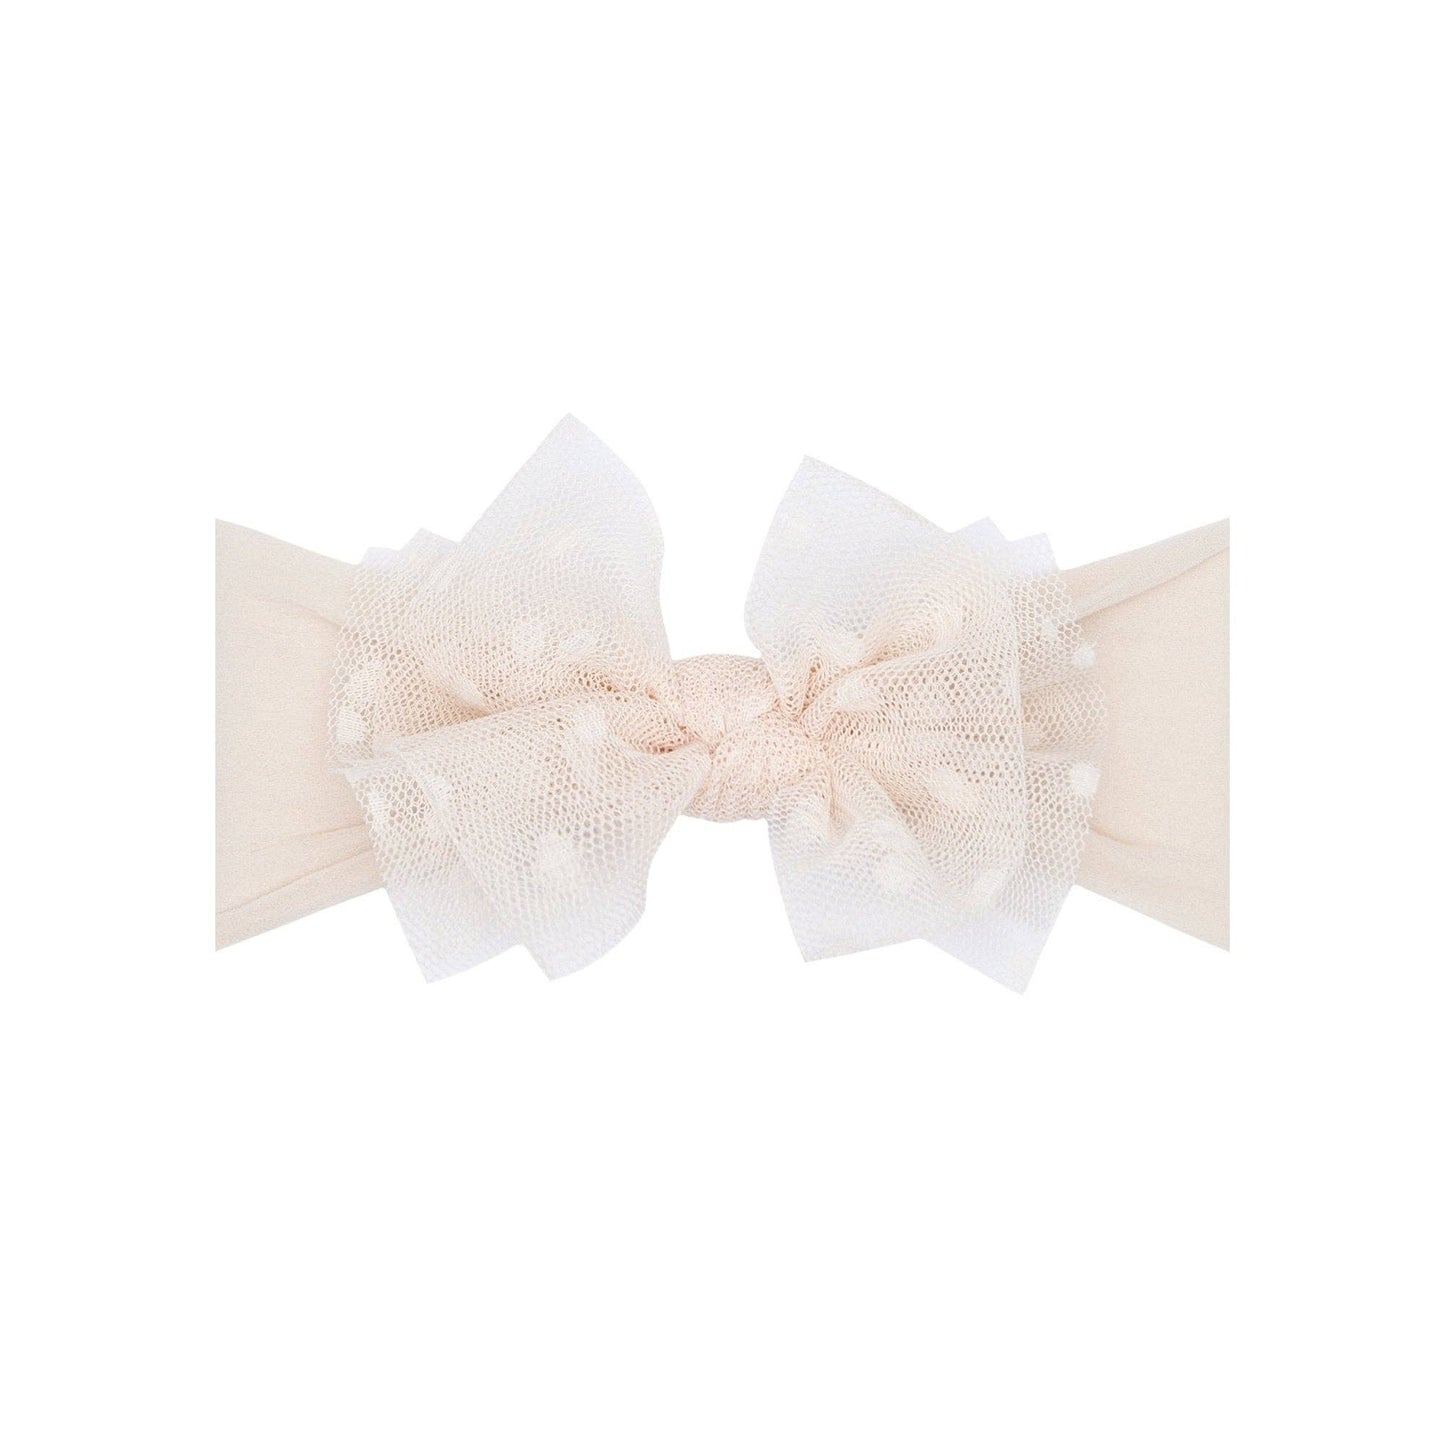 Baby Bling Bows - Itty Bitty Tulle: Oatmeal